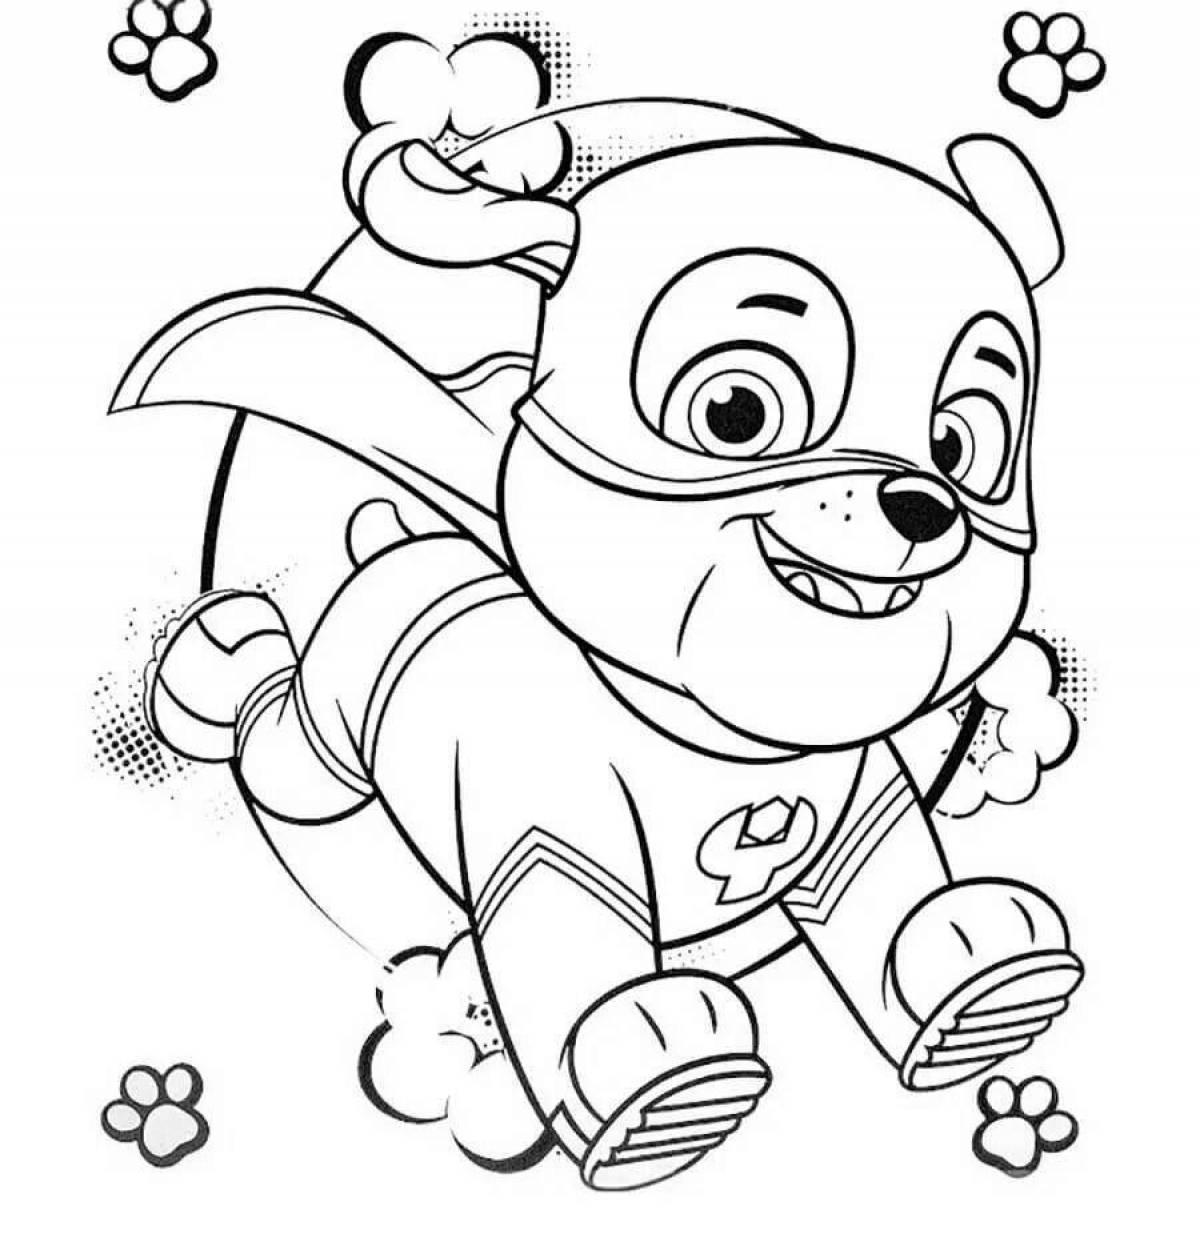 Cute coloring page paw patrol super puppies